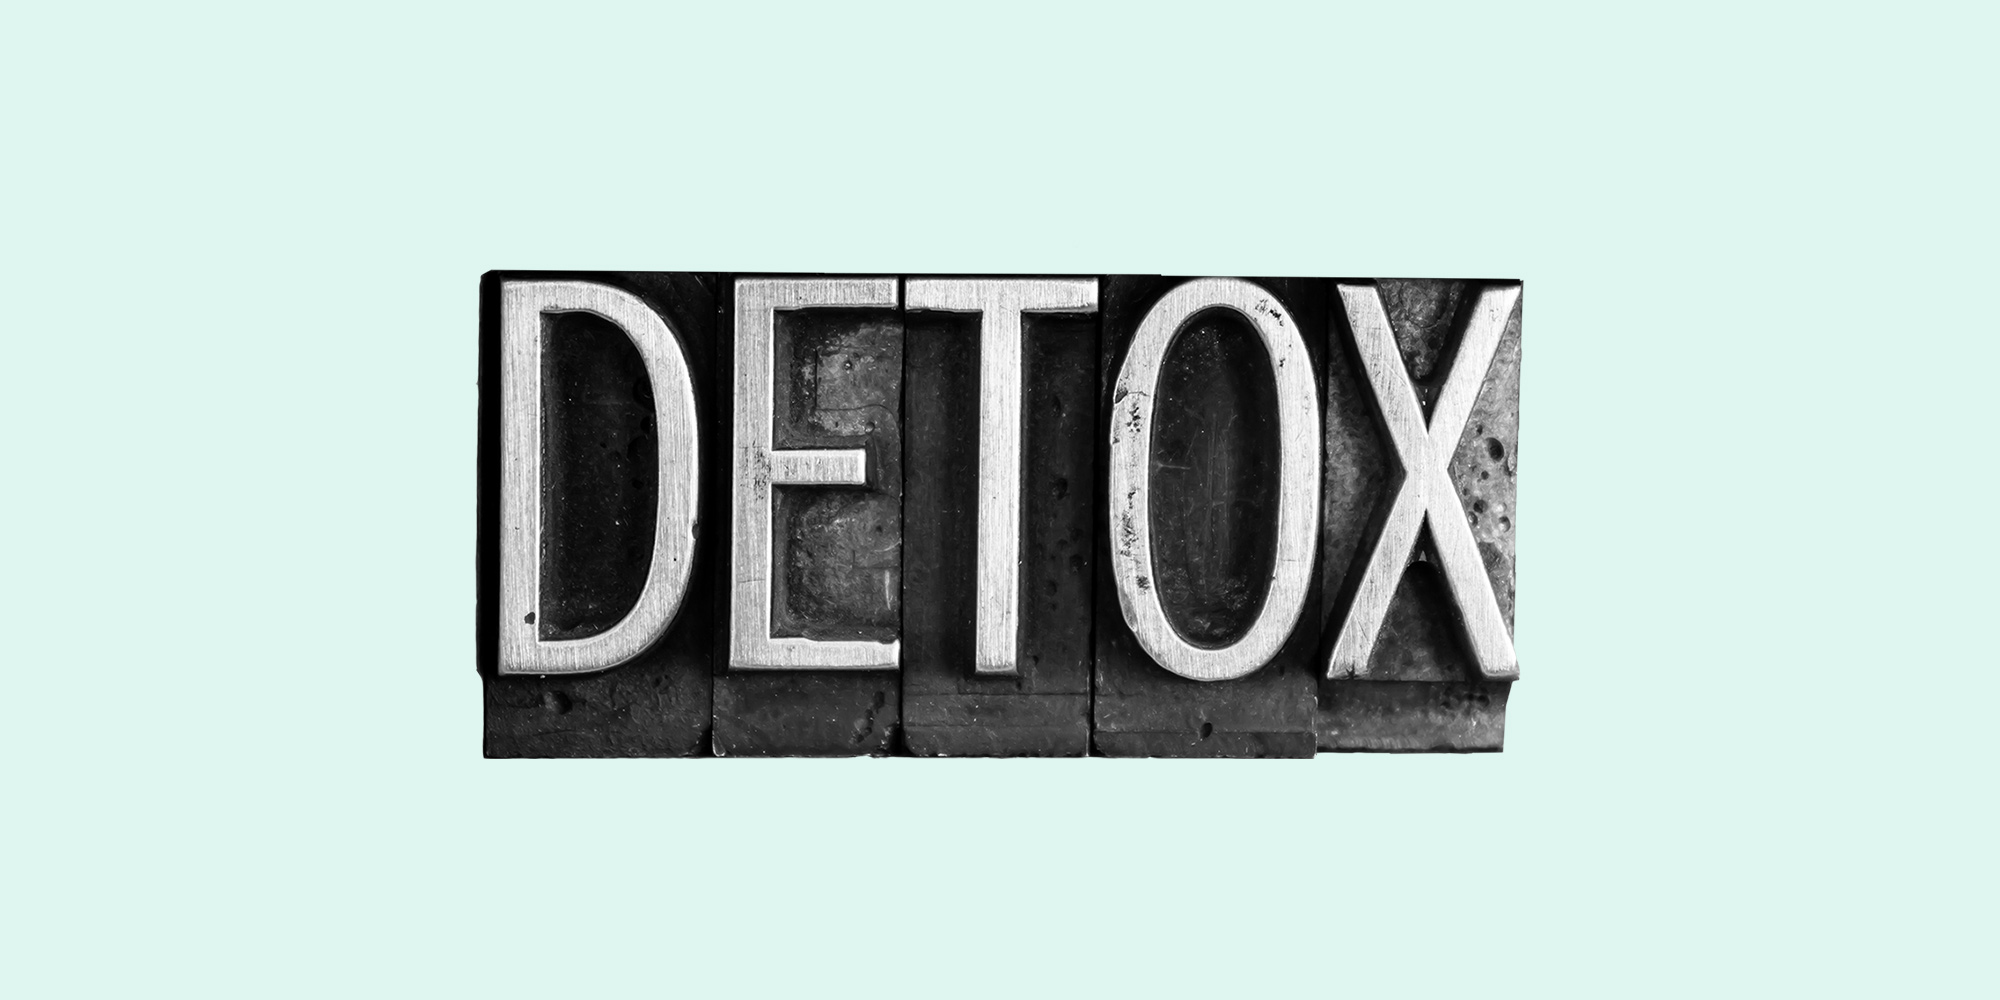 Typesetters blocks spelling out the word "Detox." Detox from alcohol